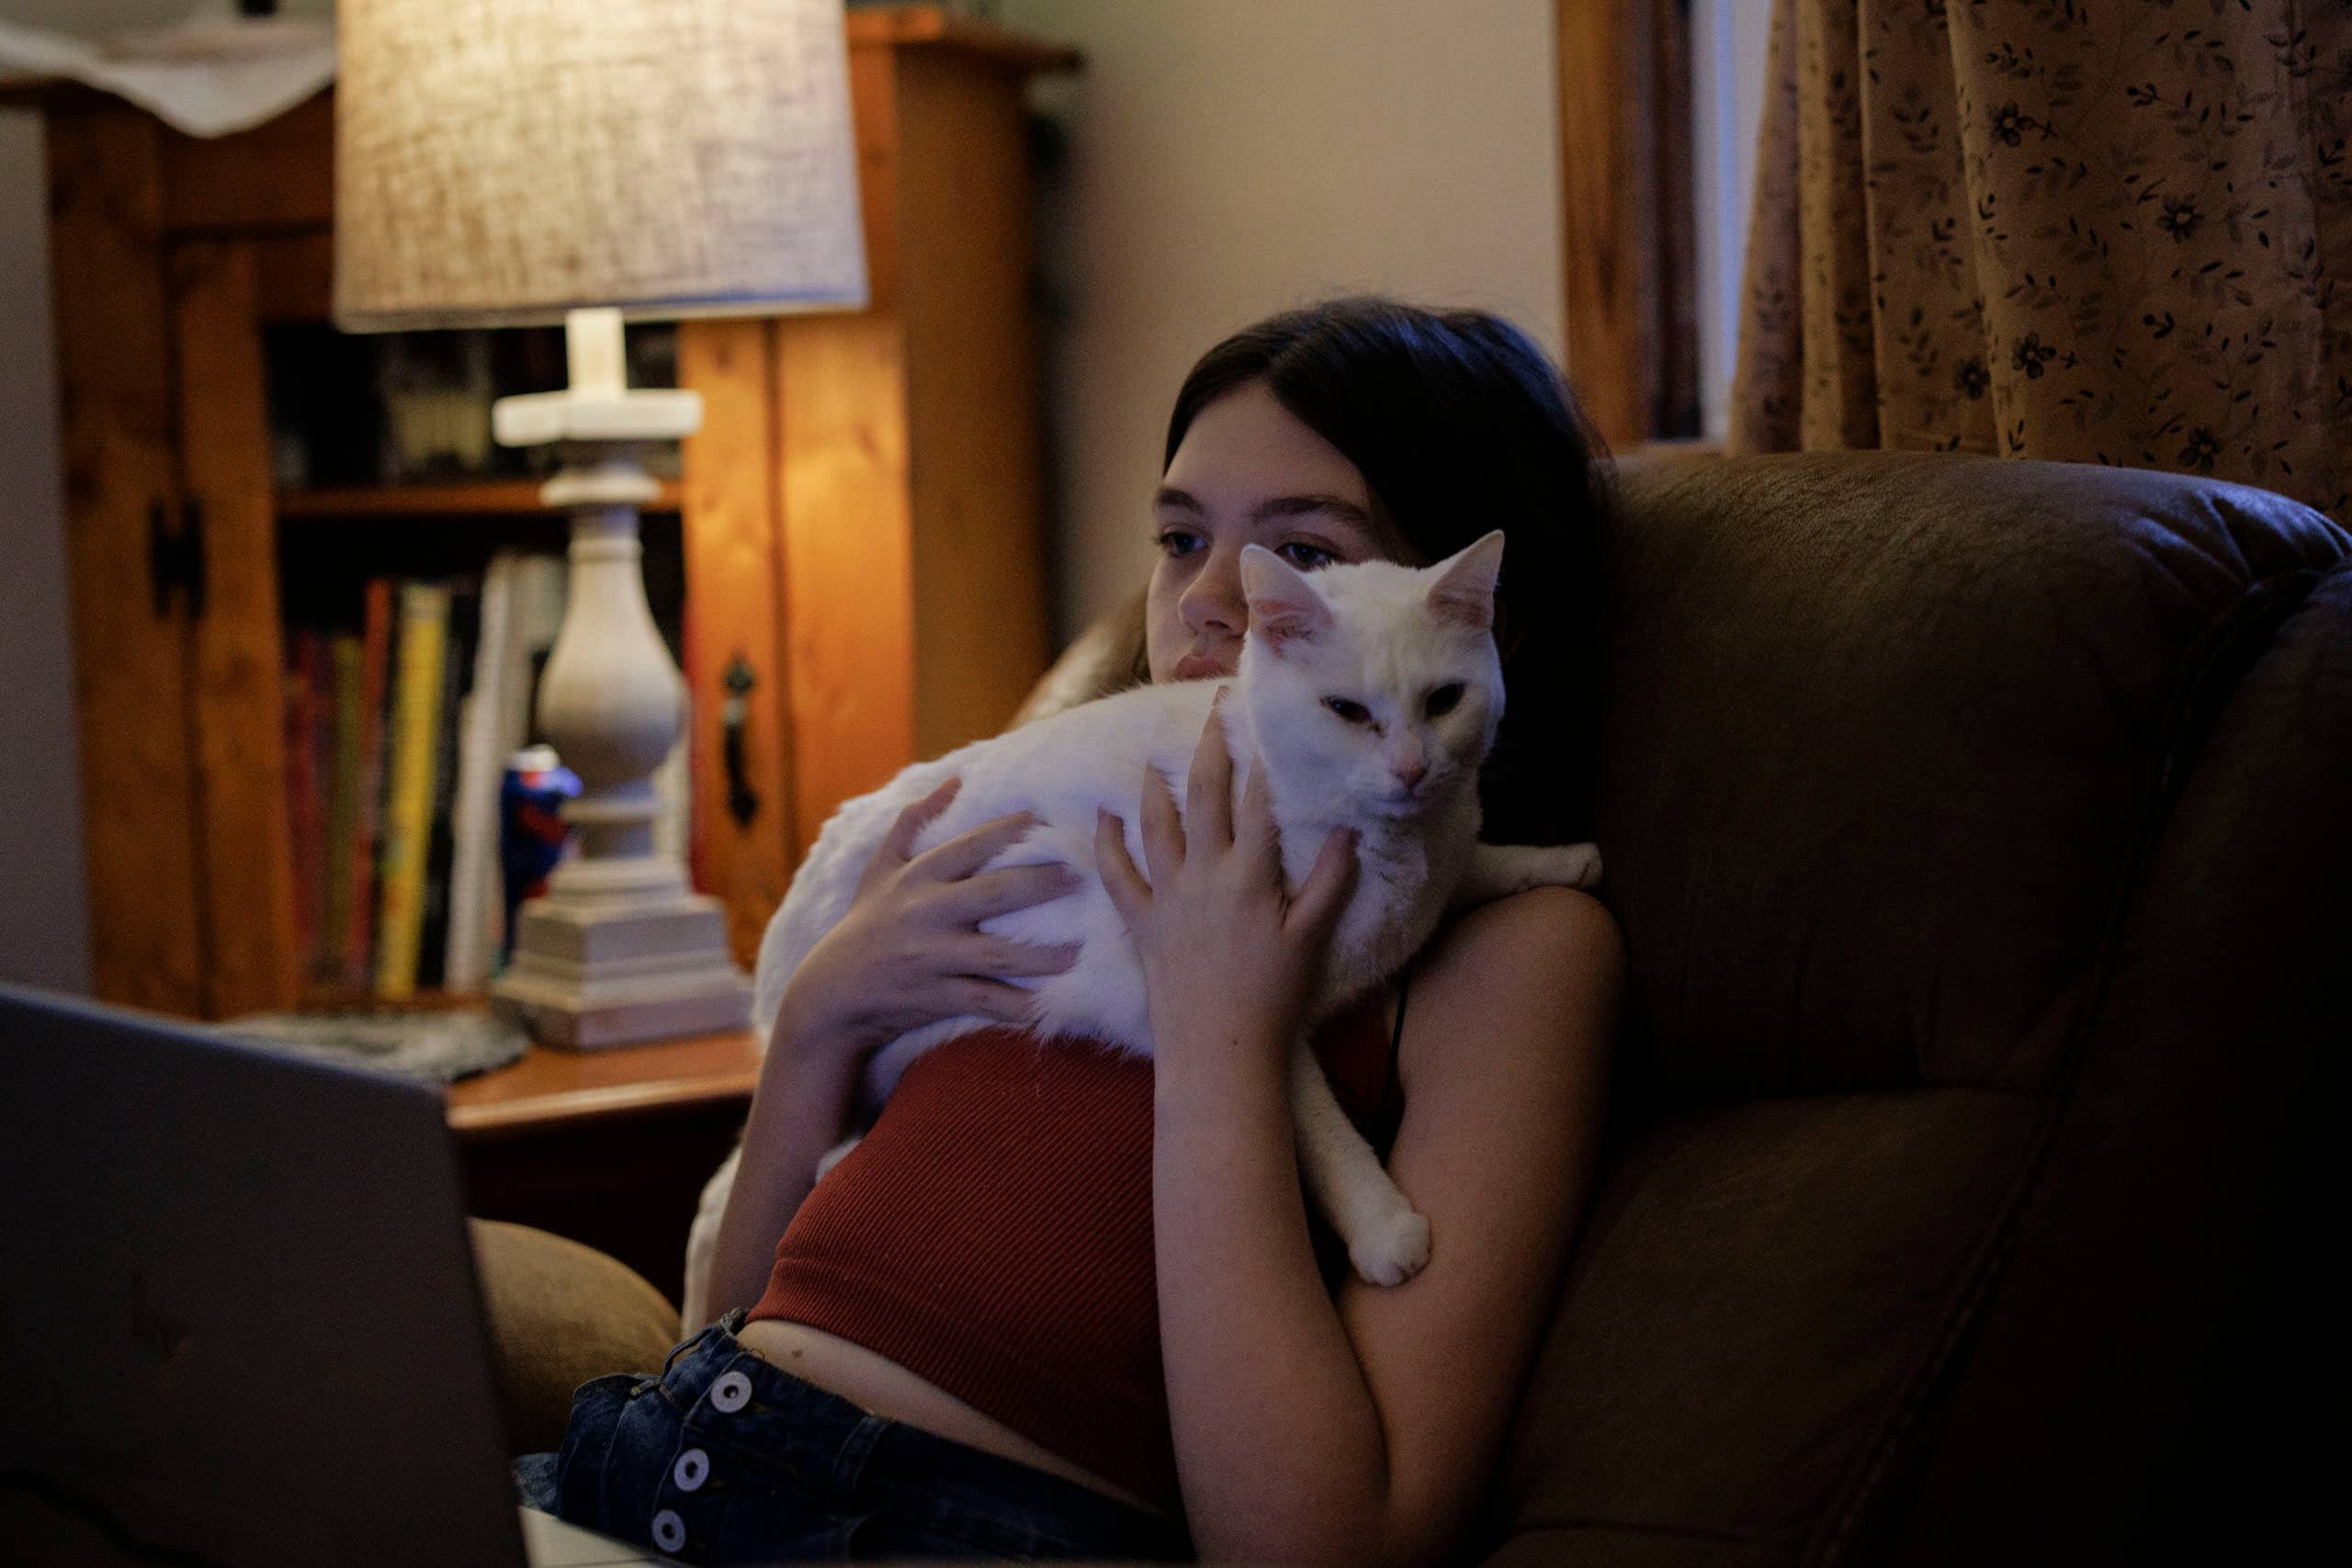 A girl sitting in a chair holding a cat.